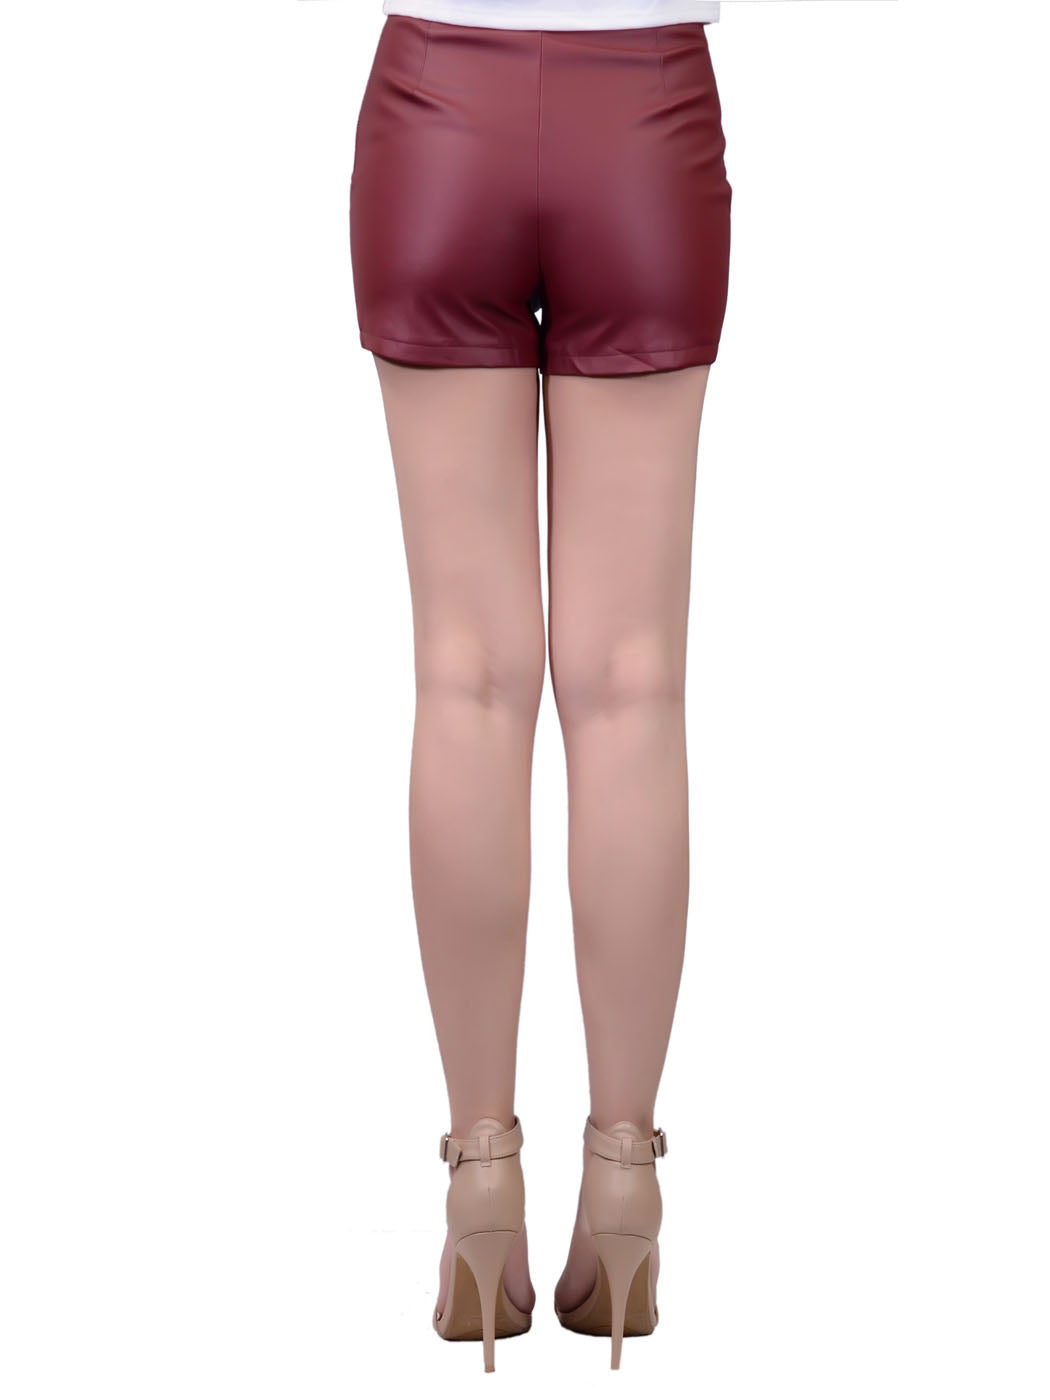 Uniq Rocker Chic Tulip Hem Faux Leather High Waisted Fitted Shorts - ALILANG.COM